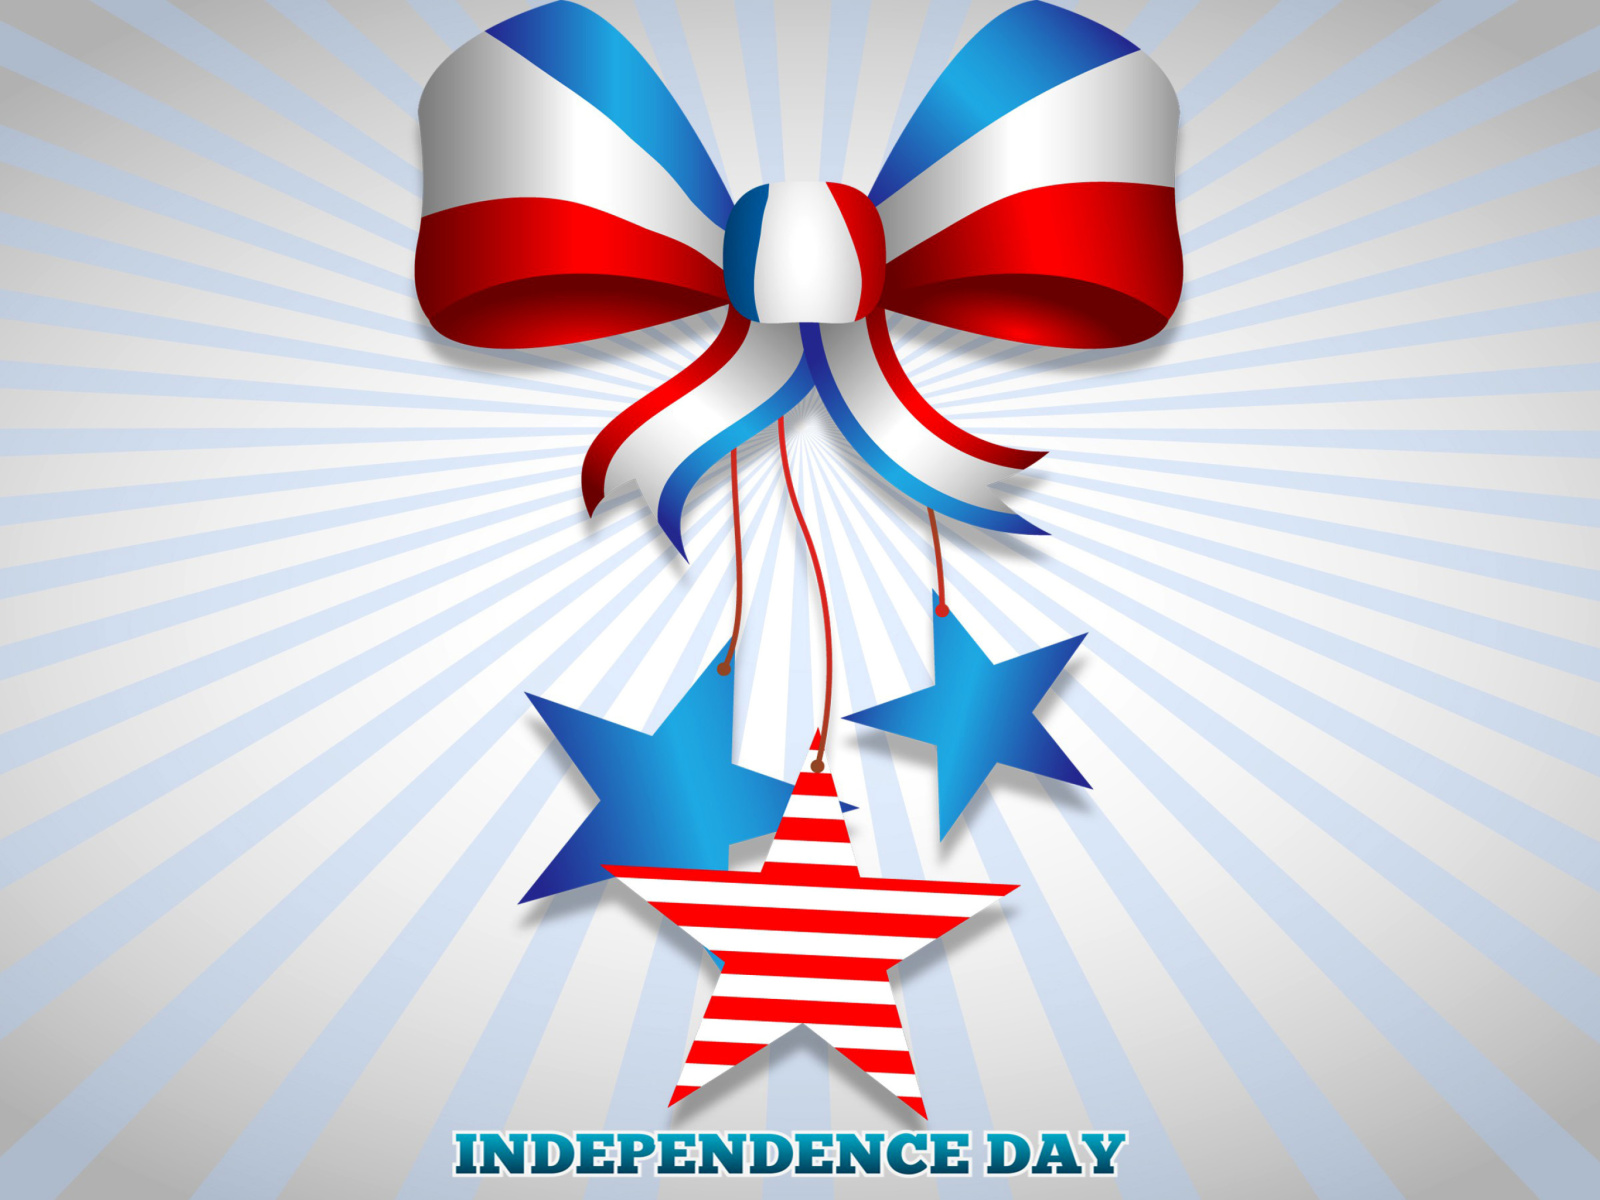 United states america Idependence day 4th july wallpaper 1600x1200